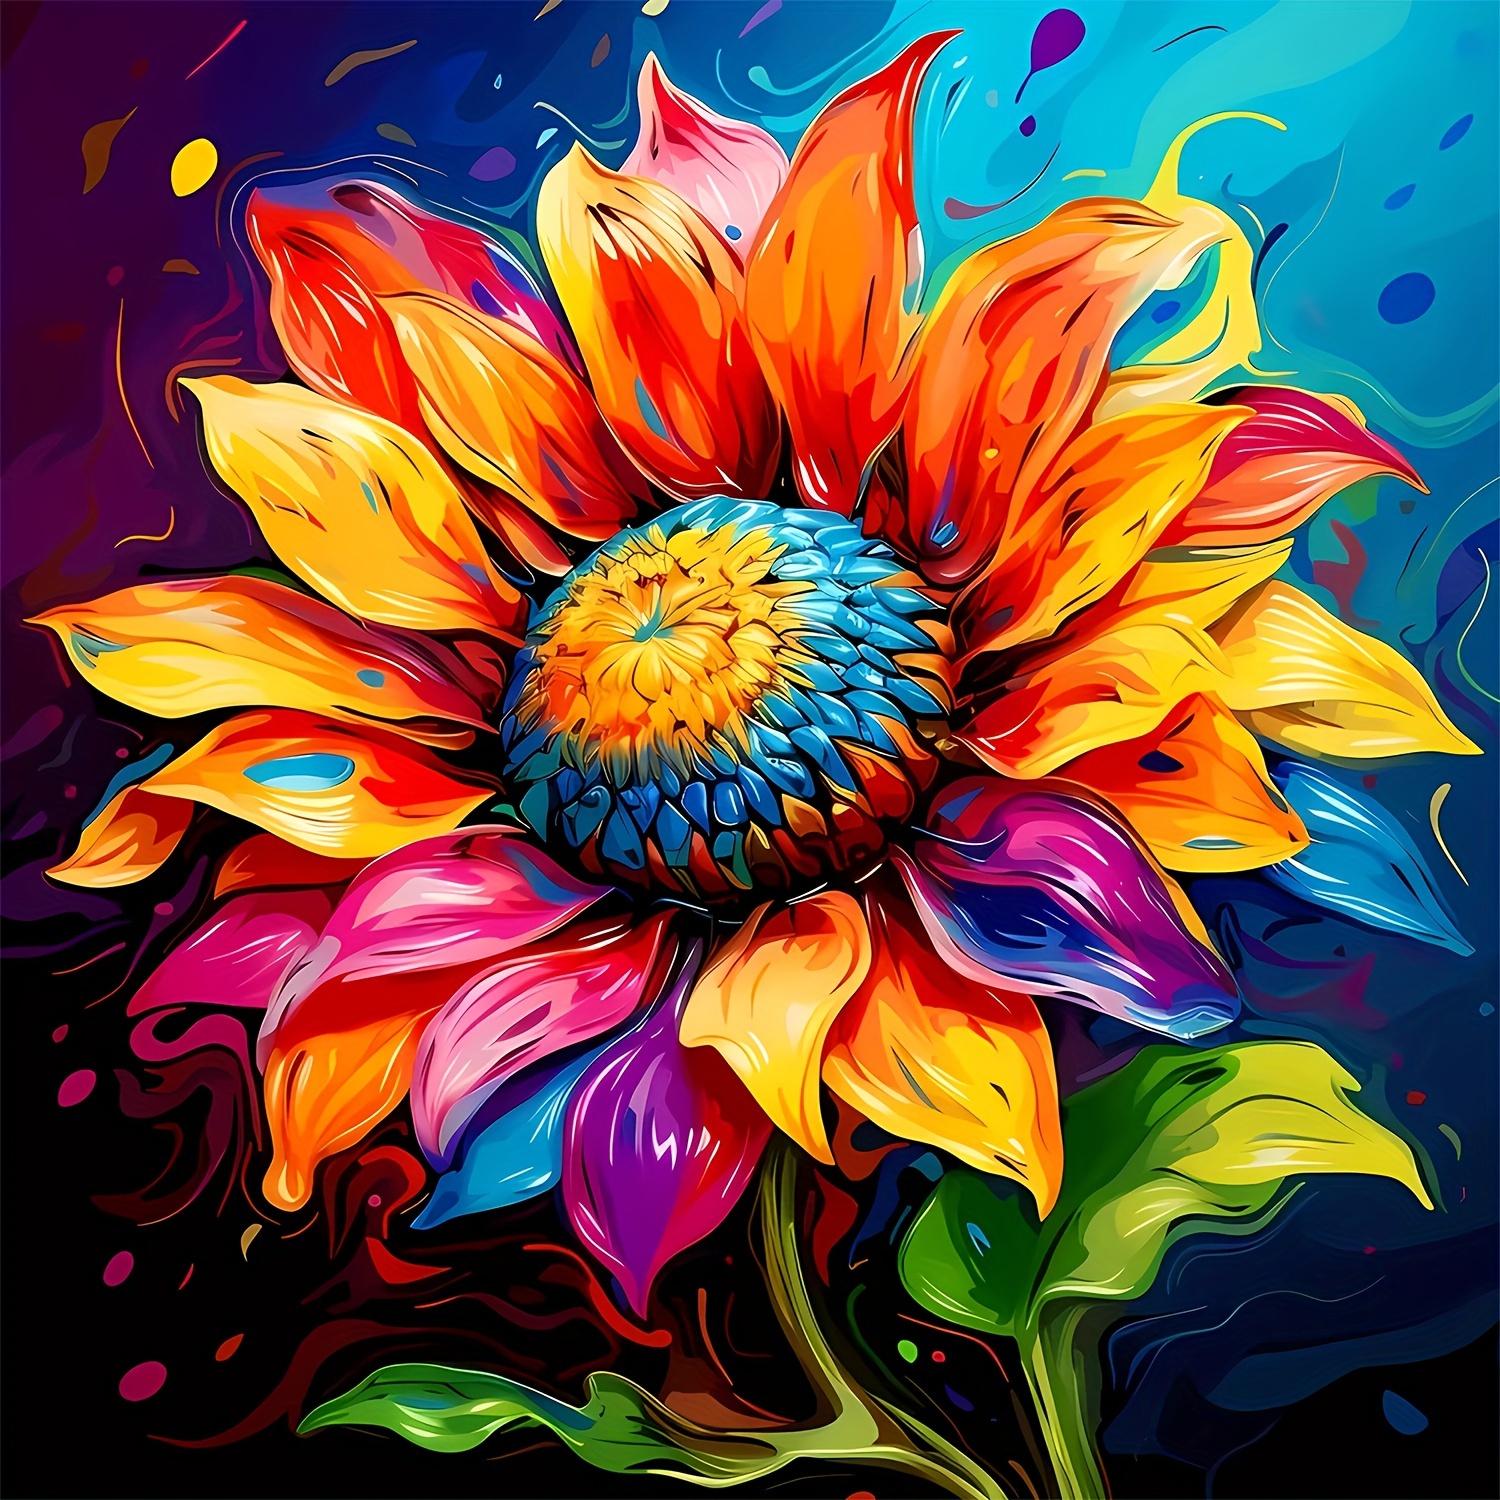 

Sunflower Diamond Art Kit 7.87x7.87in - Diy 5d Full Drill Round Diamond Painting, Frameless Mosaic Craft For Home Decor, Relaxing Gift For Adults And Beginners